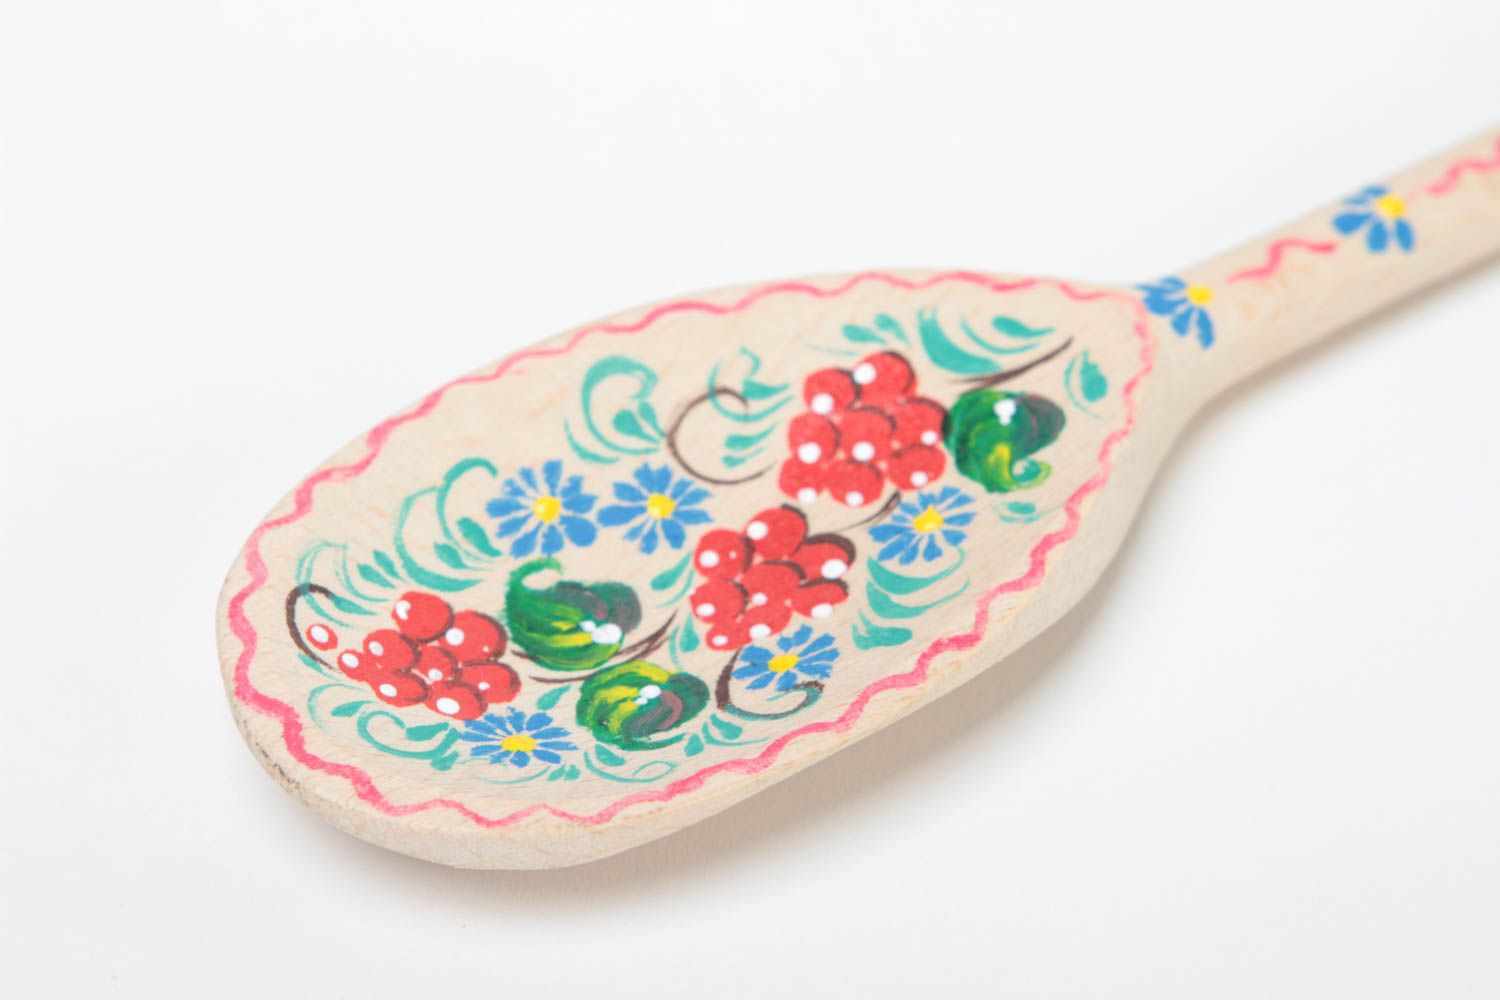 Handmade spoon unusual gift ideas for home kitchen utensils painted spoon photo 3